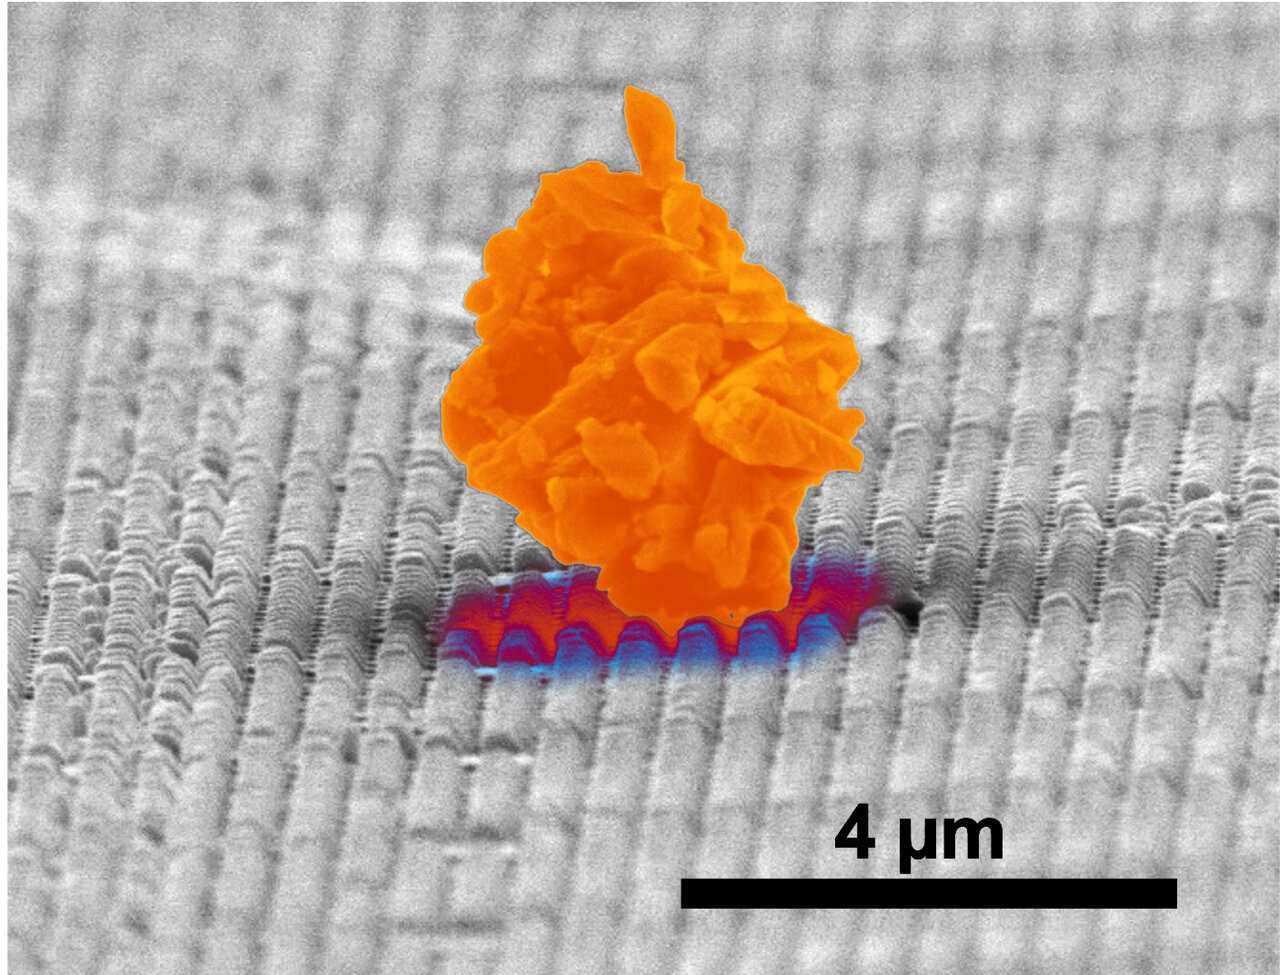 A nanoscale look at how dust aggregates on this spiky surface. Credit: The University of Texas at Austin/Smart Material Solutions